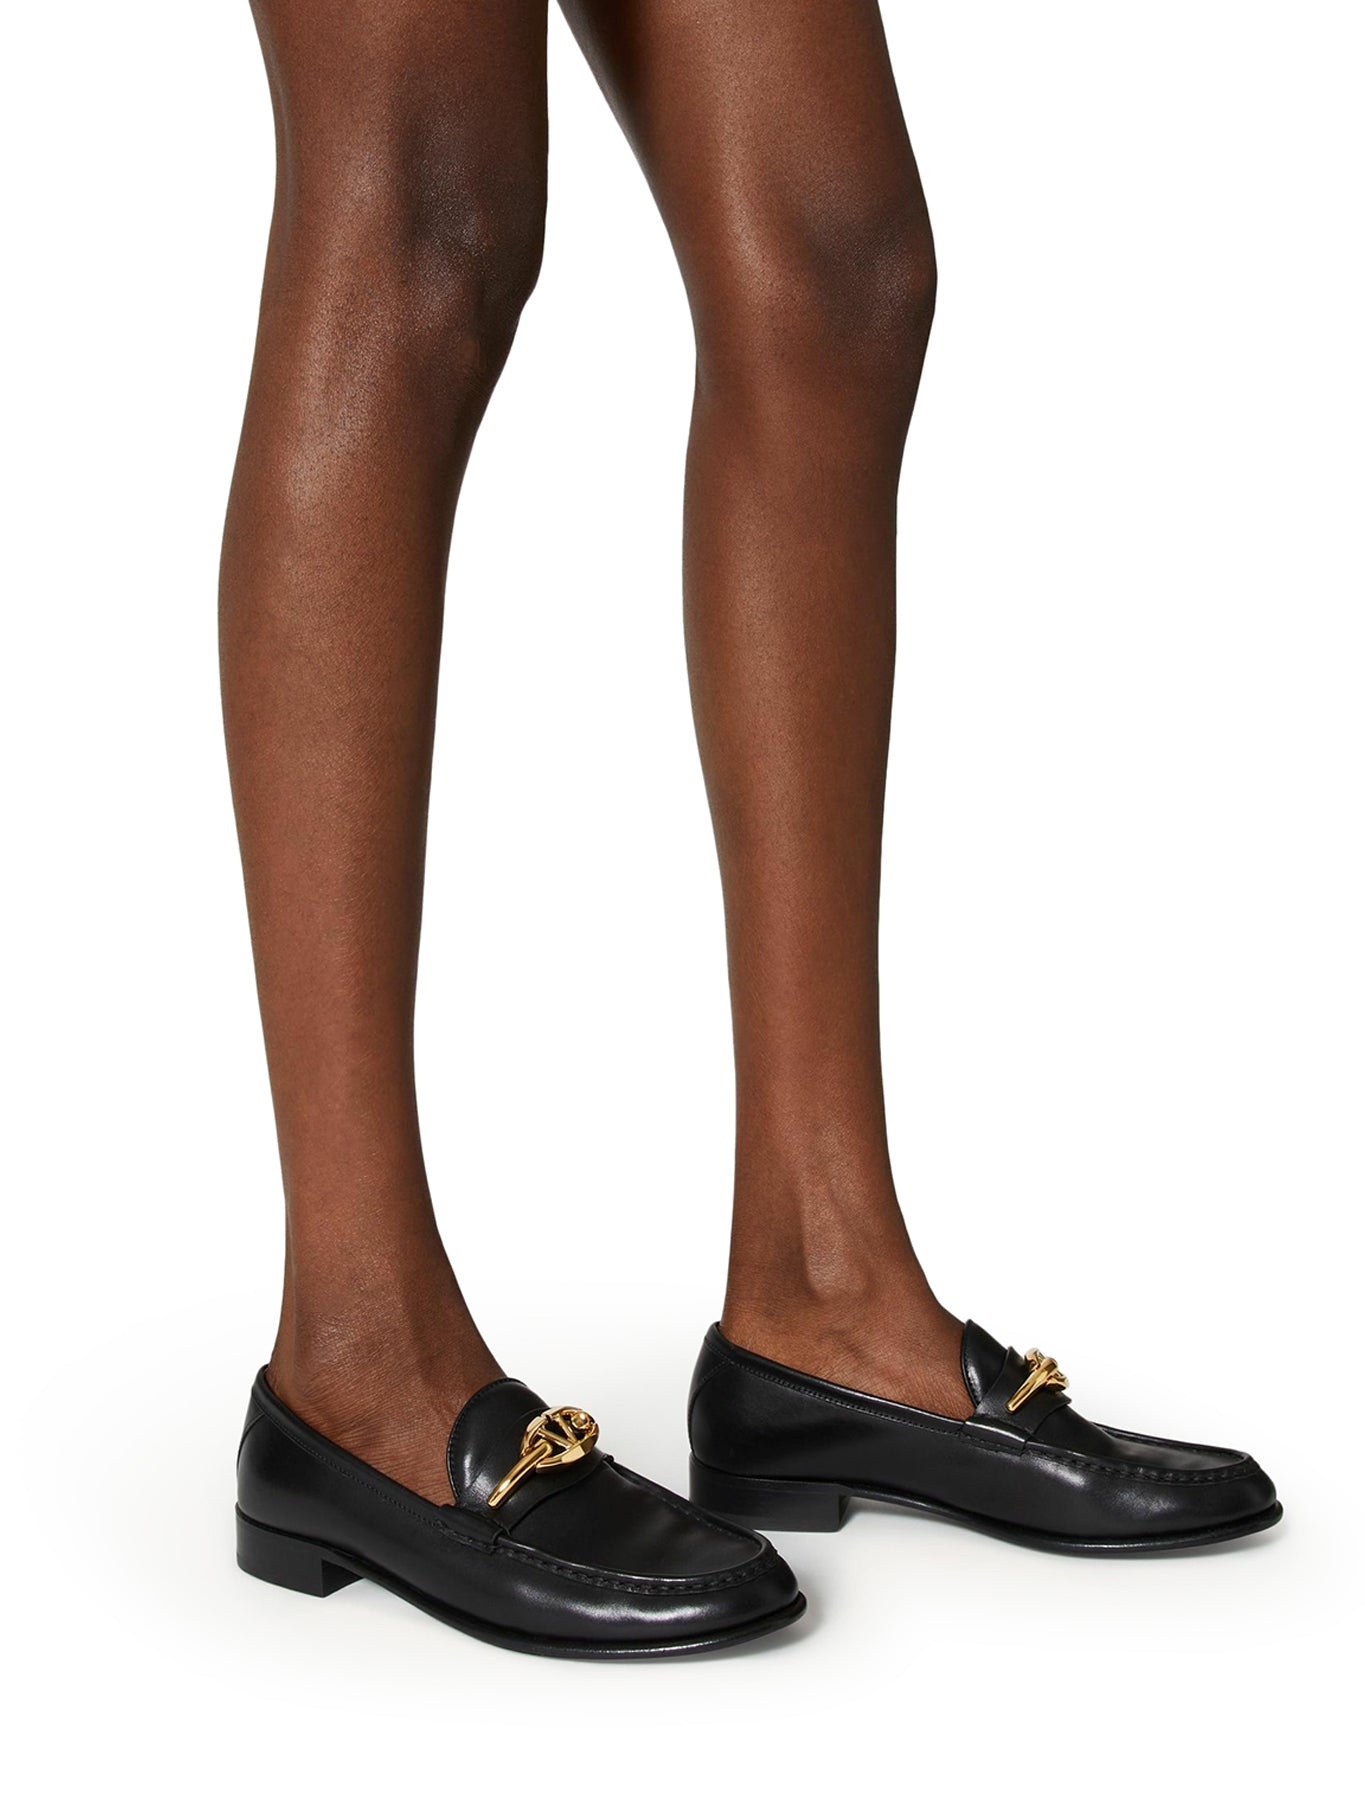 VLOGO THE BOLD EDITION LOAFERS IN CALFSKIN - 2